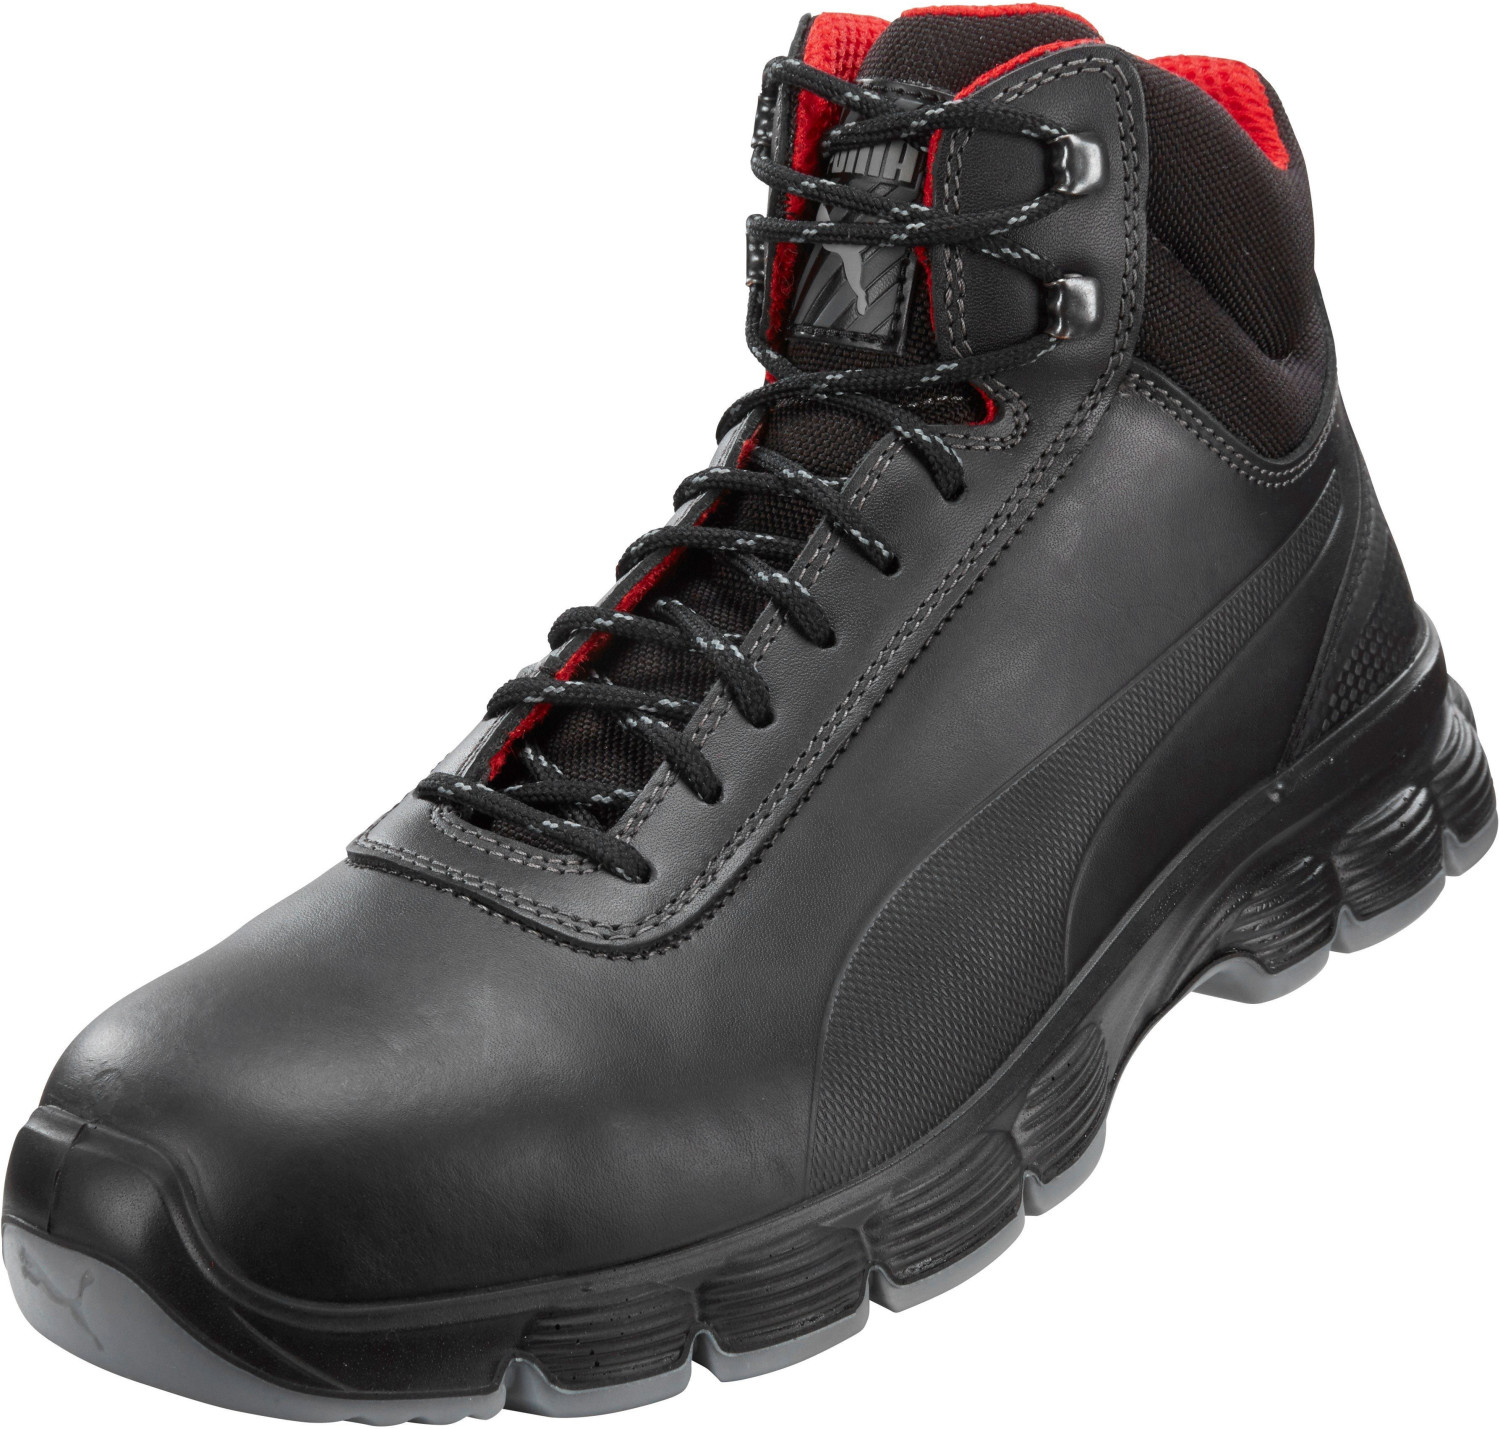 Buy Puma Safety Pioneer Mid Best – from (Today) on Deals (630101) black £84.95